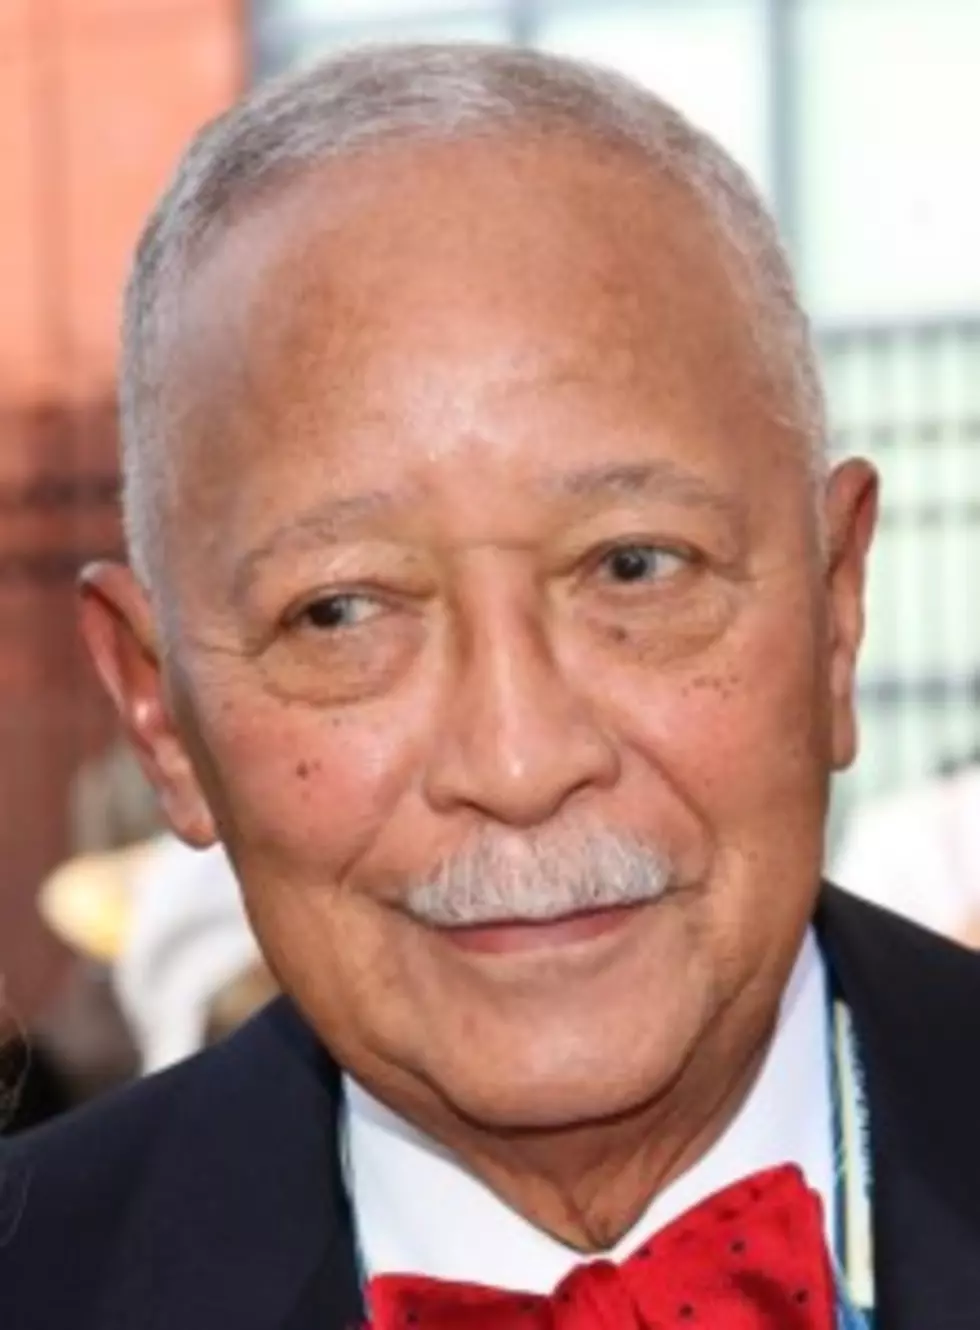 Former NYC Mayor David Dinkins Released From Hospital